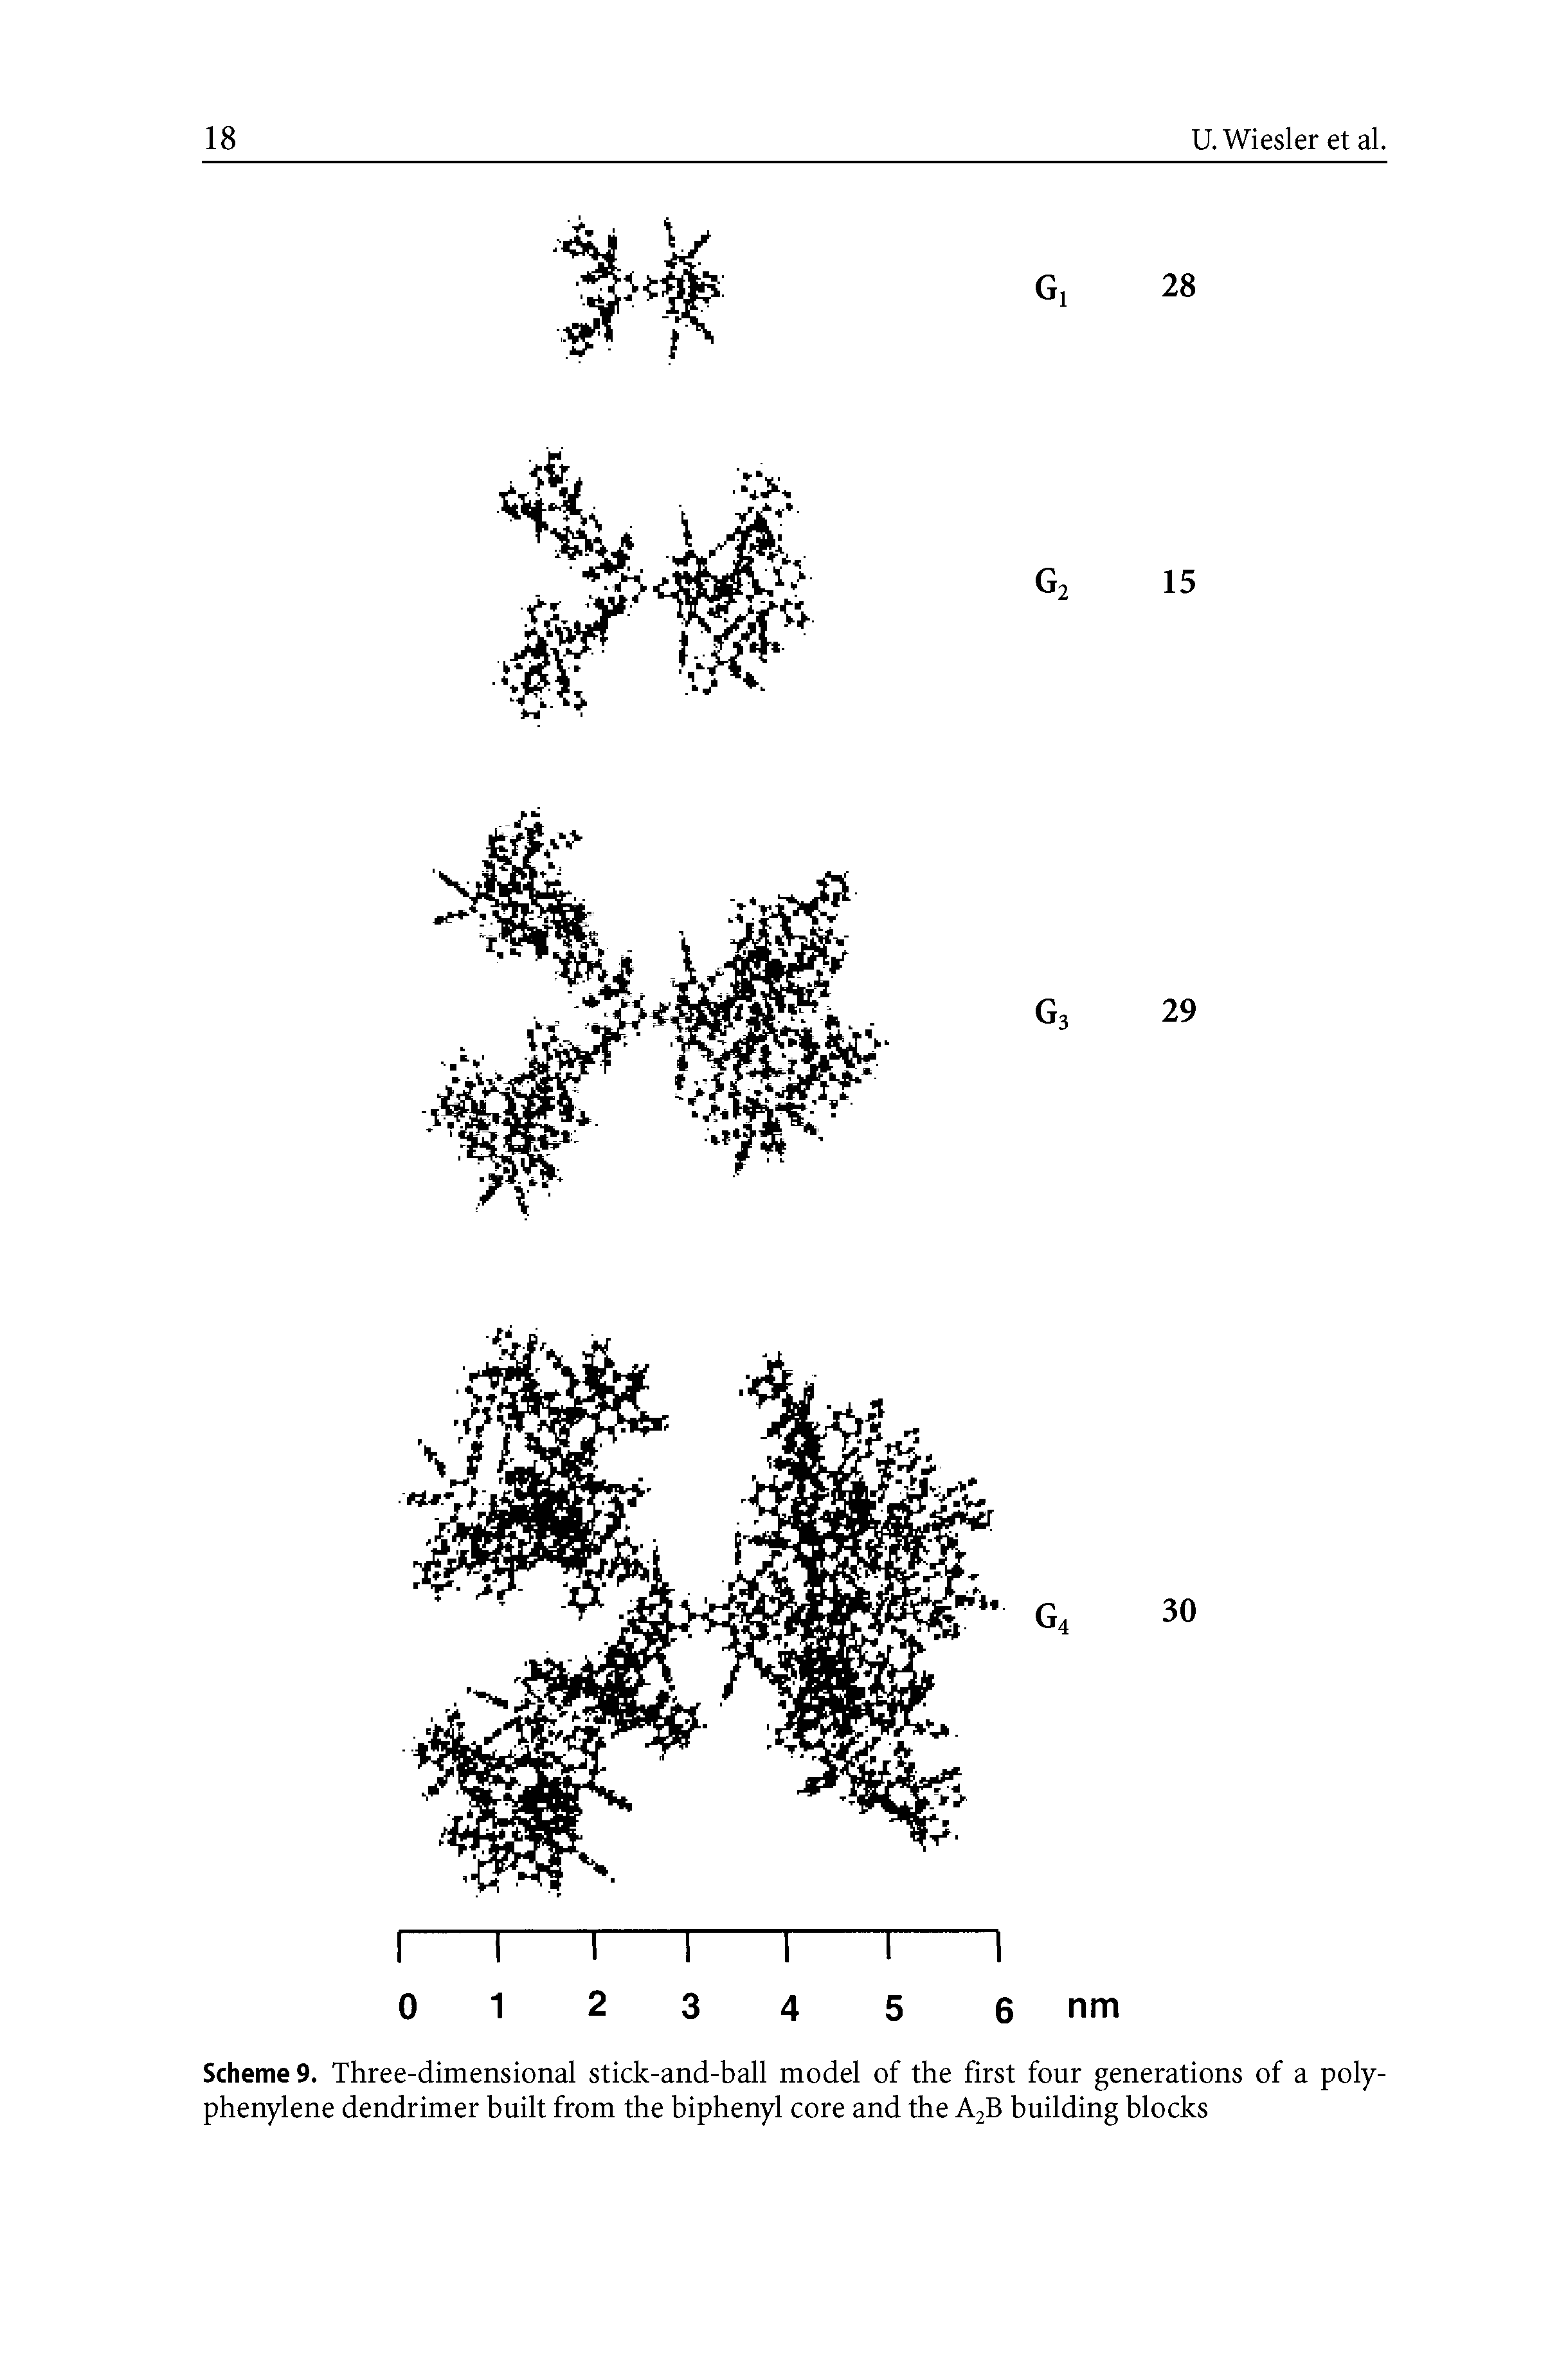 Scheme 9. Three-dimensional stick-and-ball model of the first four generations of a polyphenylene dendrimer built from the biphenyl core and the A2B building blocks...